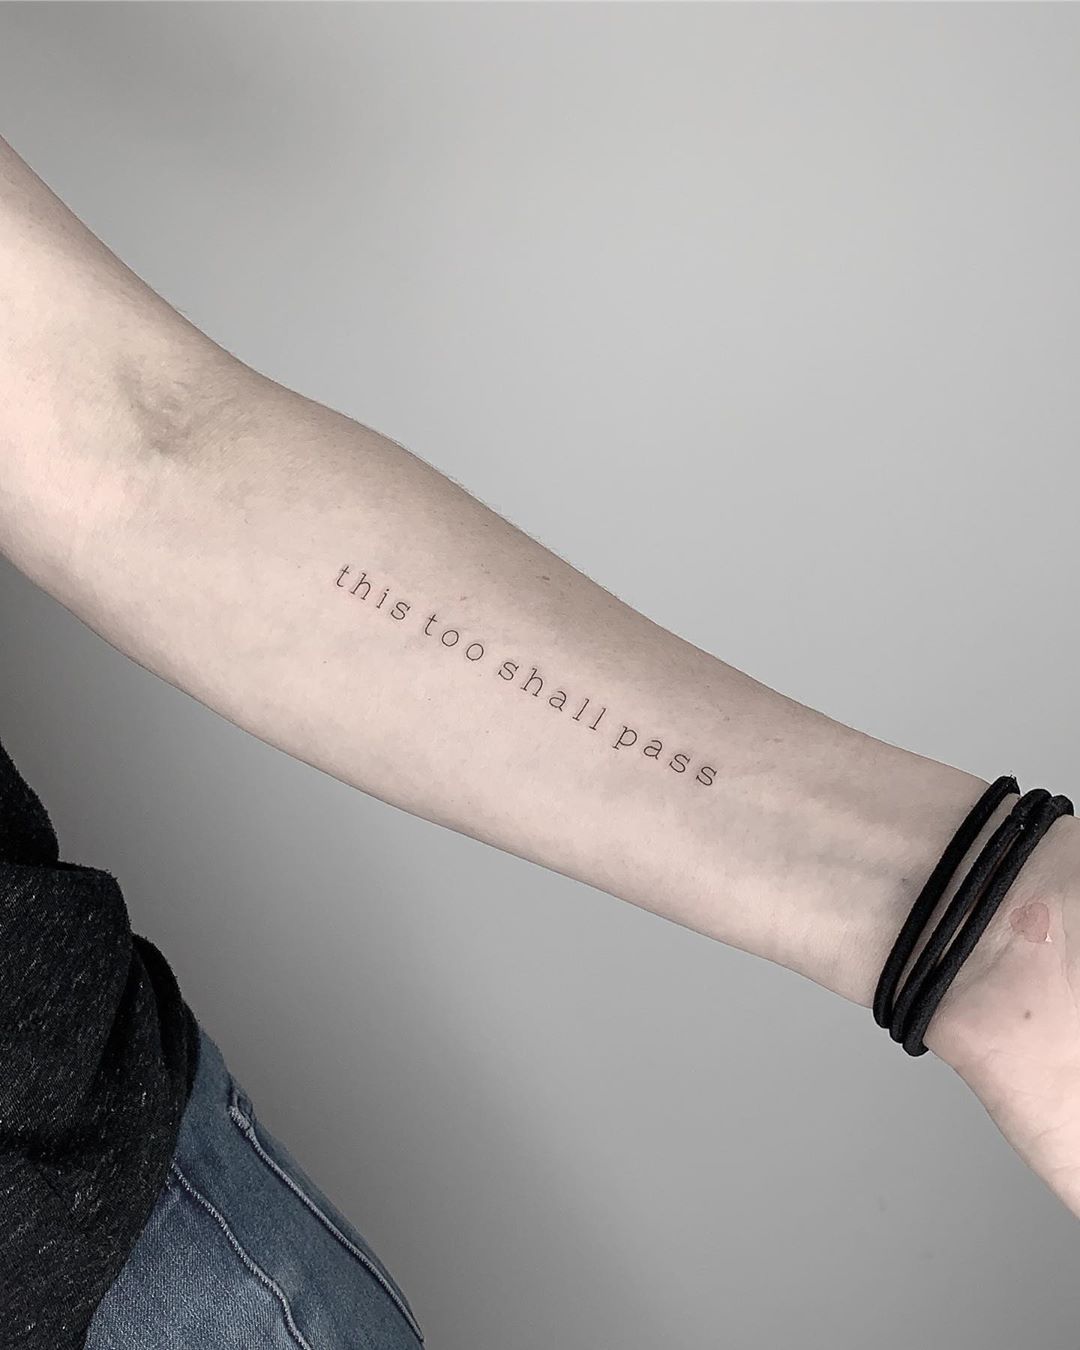 This too shall pass tattoo by Conz Thomas 